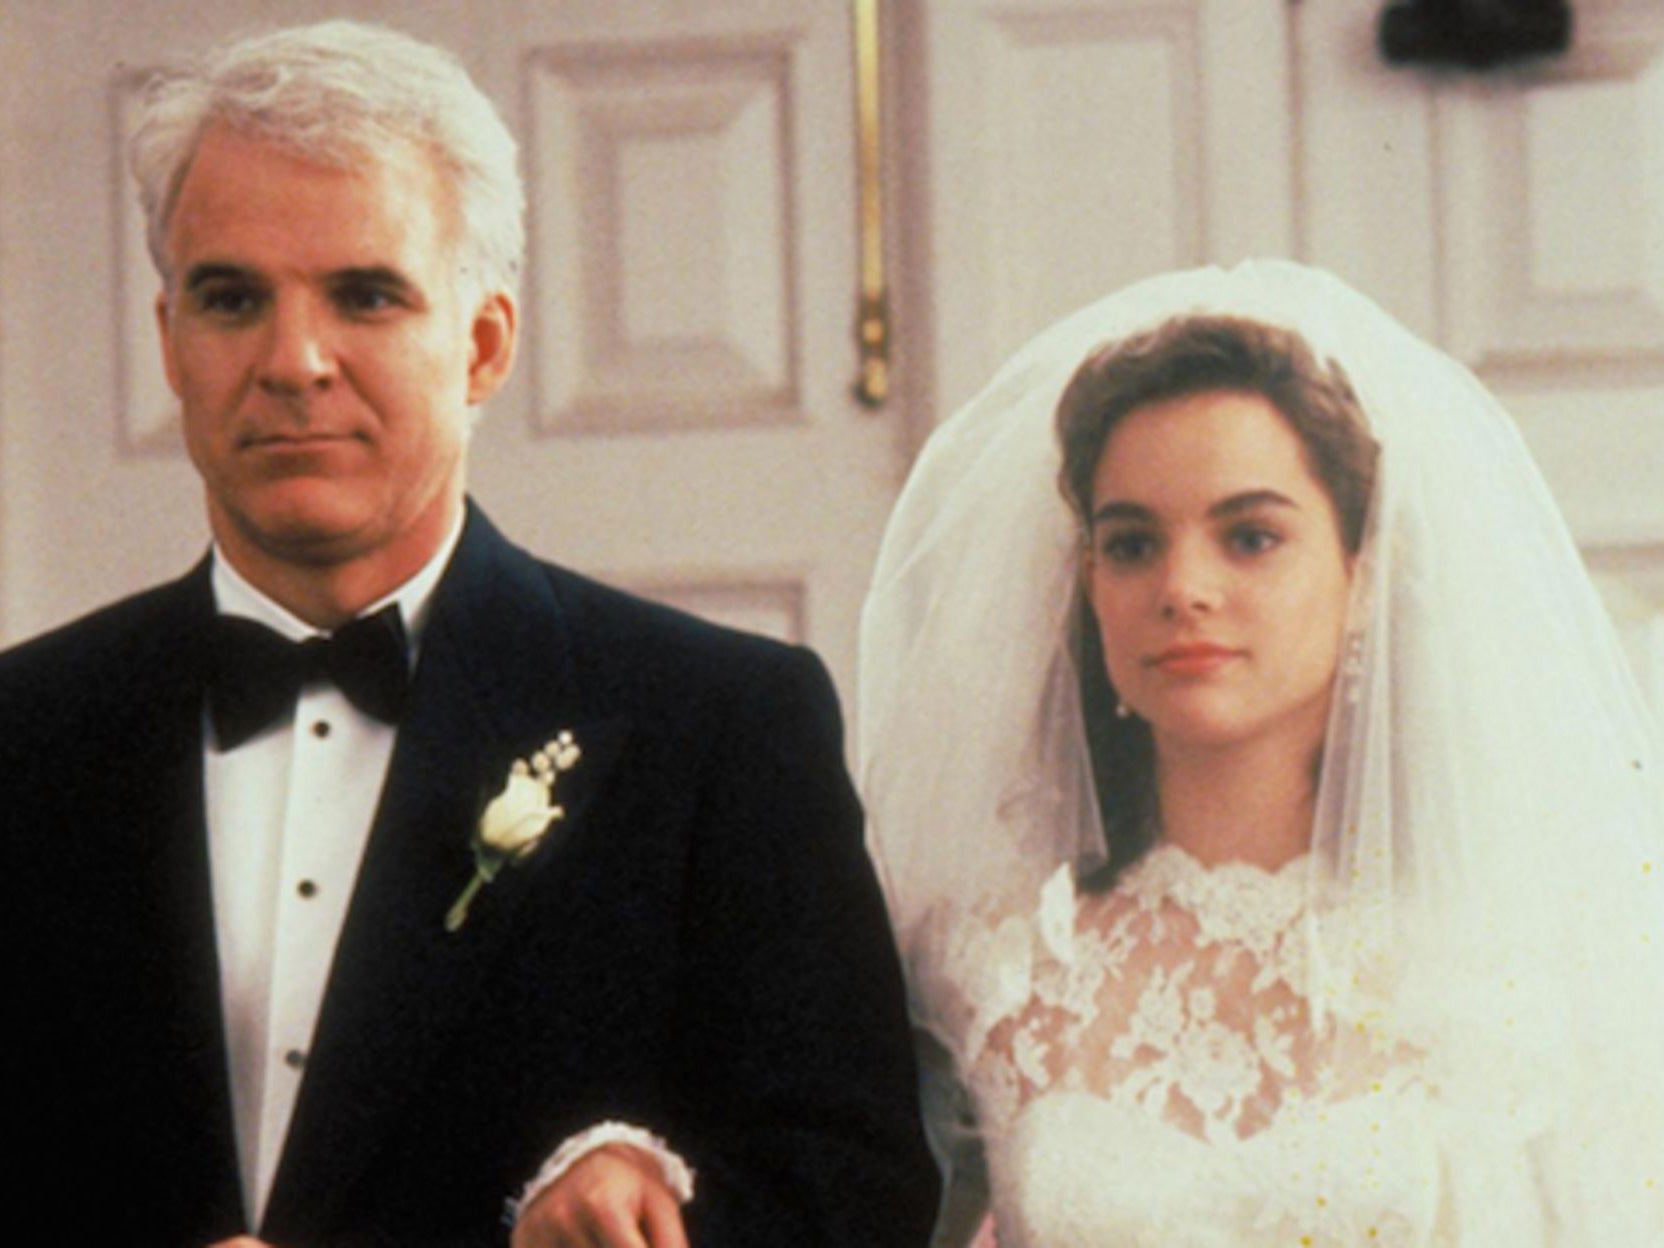 The multi award-winning actor has starred in films such as Father Of The Bride